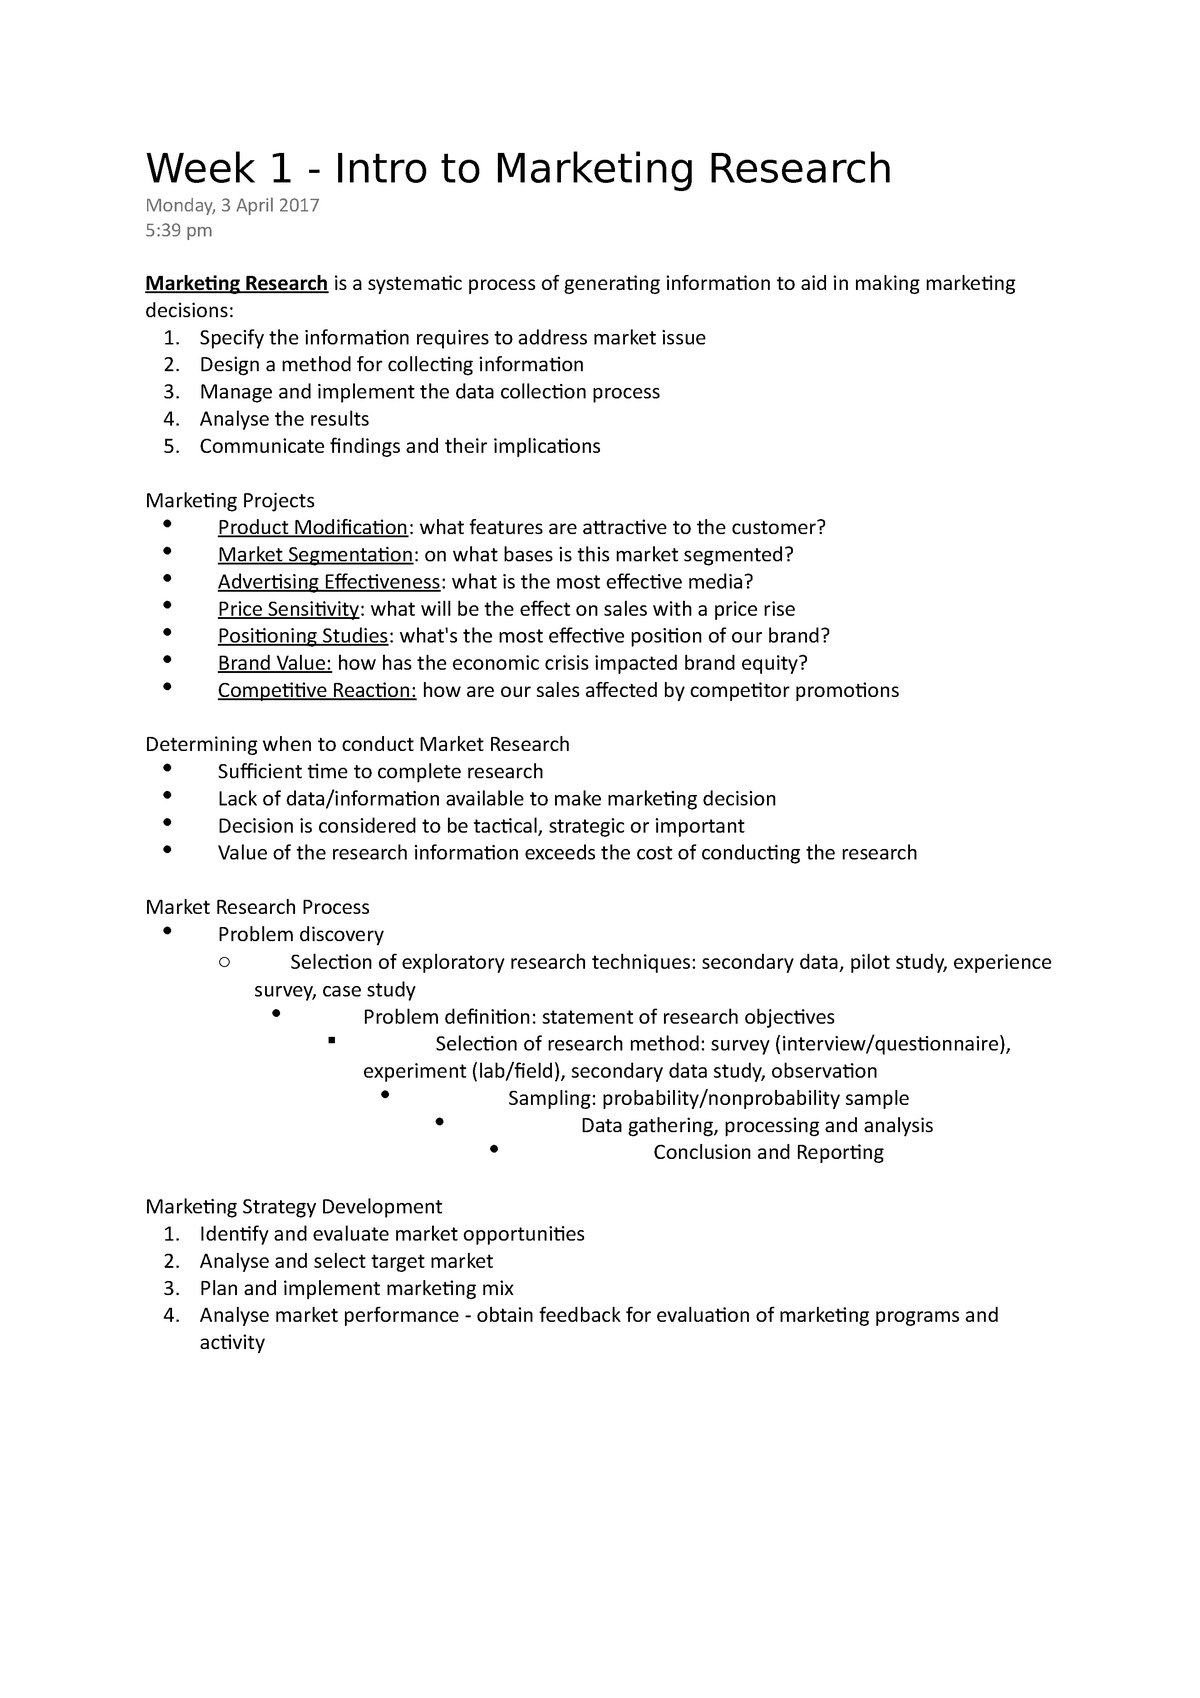 marketing research lecture notes pdf